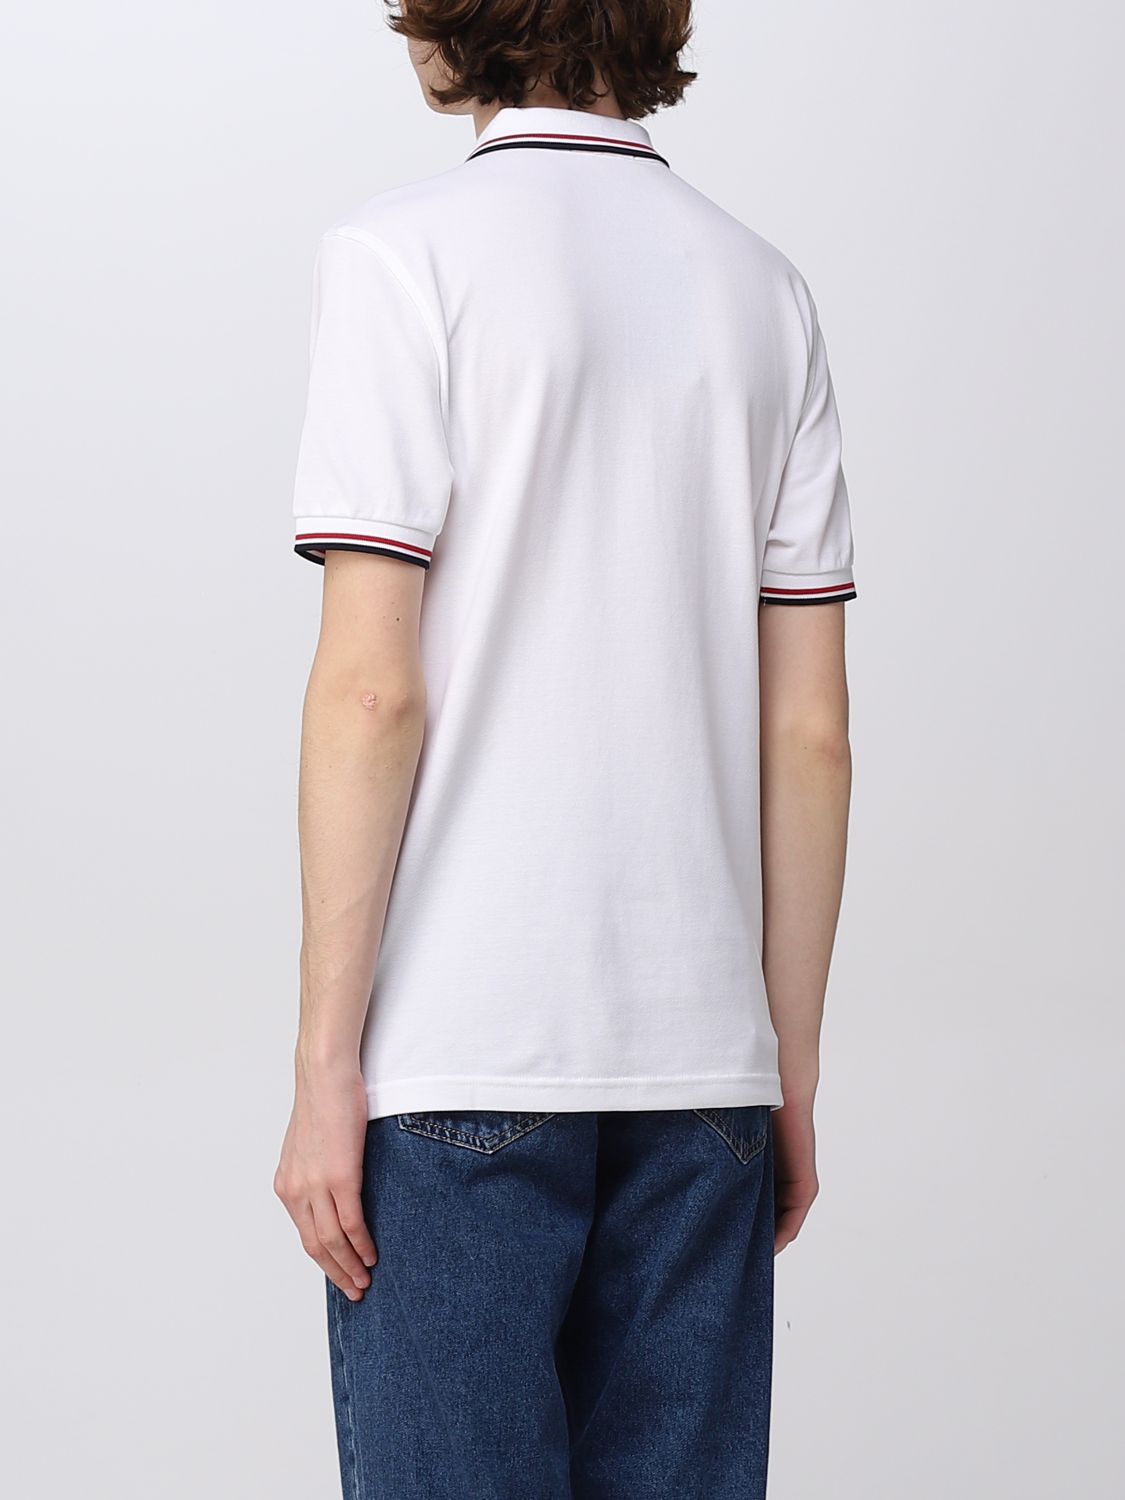 slang Vulgariteit Overeenkomend FRED PERRY: polo shirt for man - White | Fred Perry polo shirt M3600 online  on GIGLIO.COM